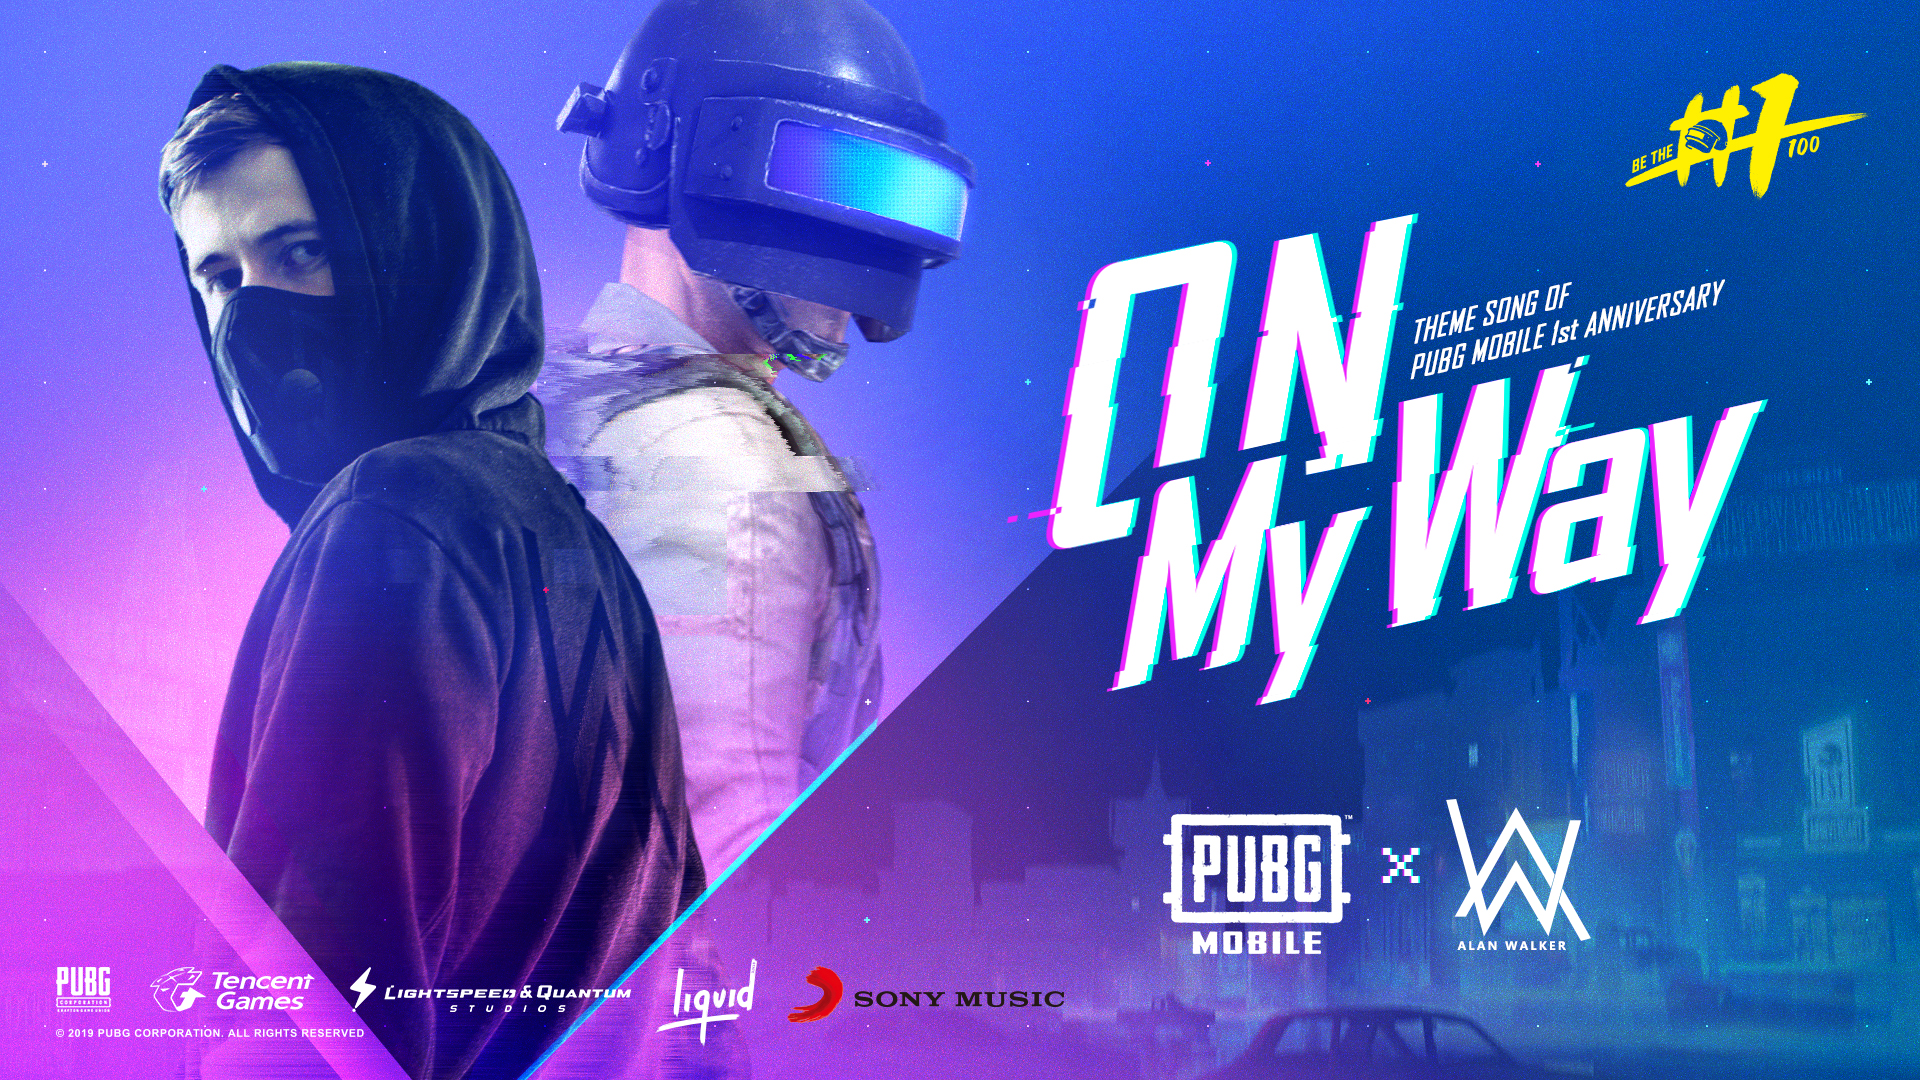 Official Pubg On Mobile - to celebrate the game s anniversary and the release of the song pubg mobile players can utilize an alan walker themed outfit that resembles his iconic mask